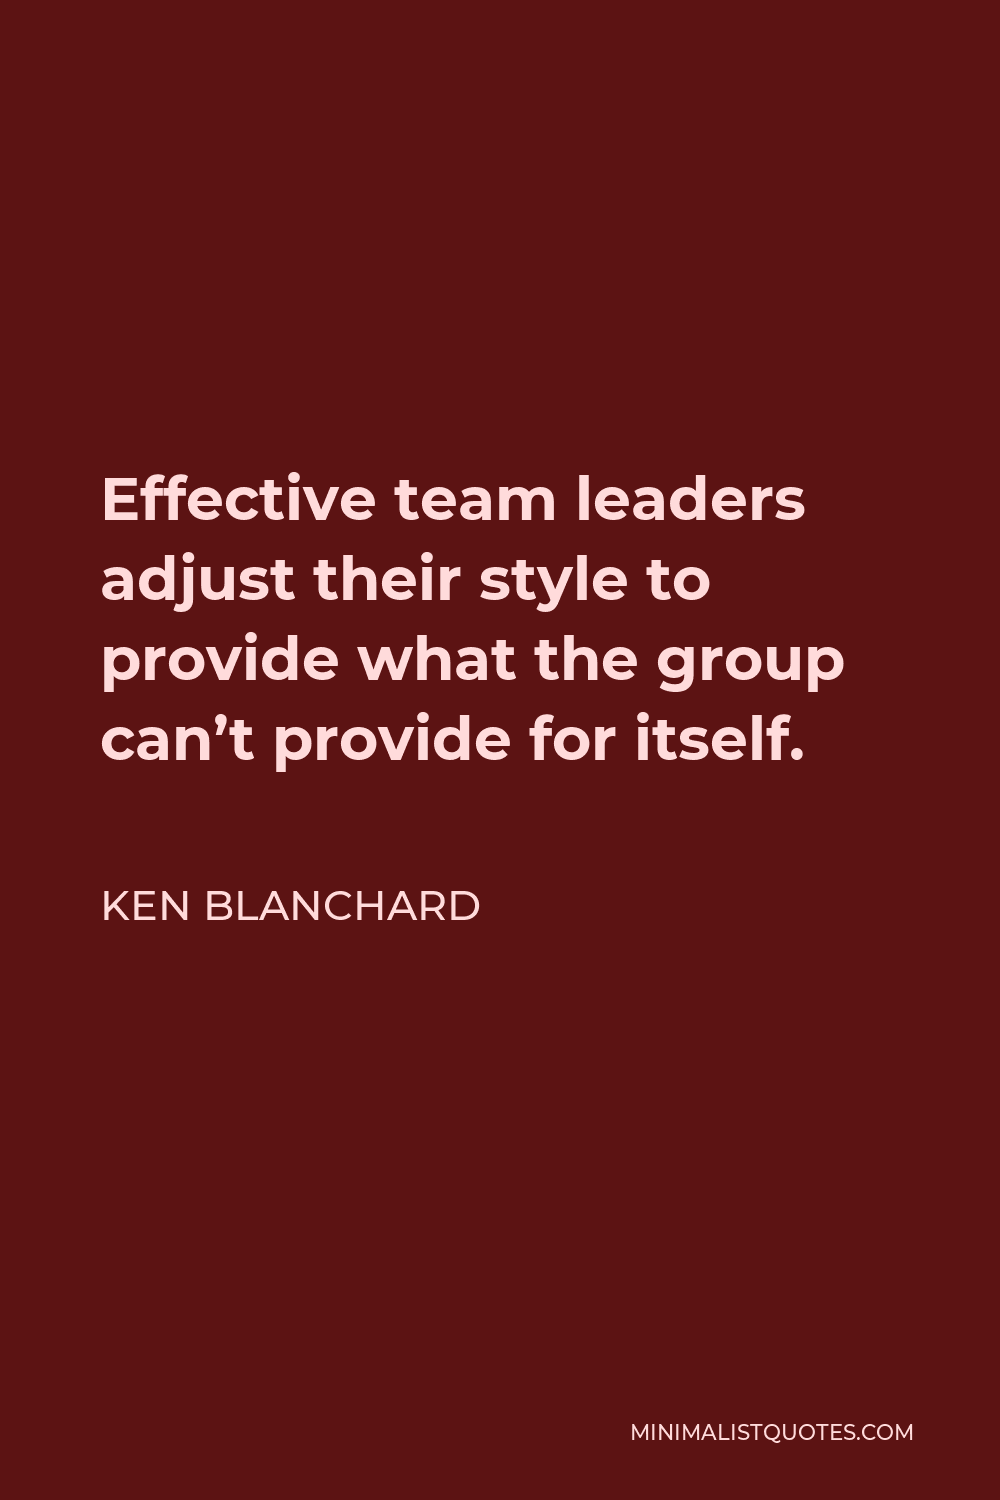 Ken Blanchard Quote - Effective team leaders adjust their style to provide what the group can’t provide for itself.